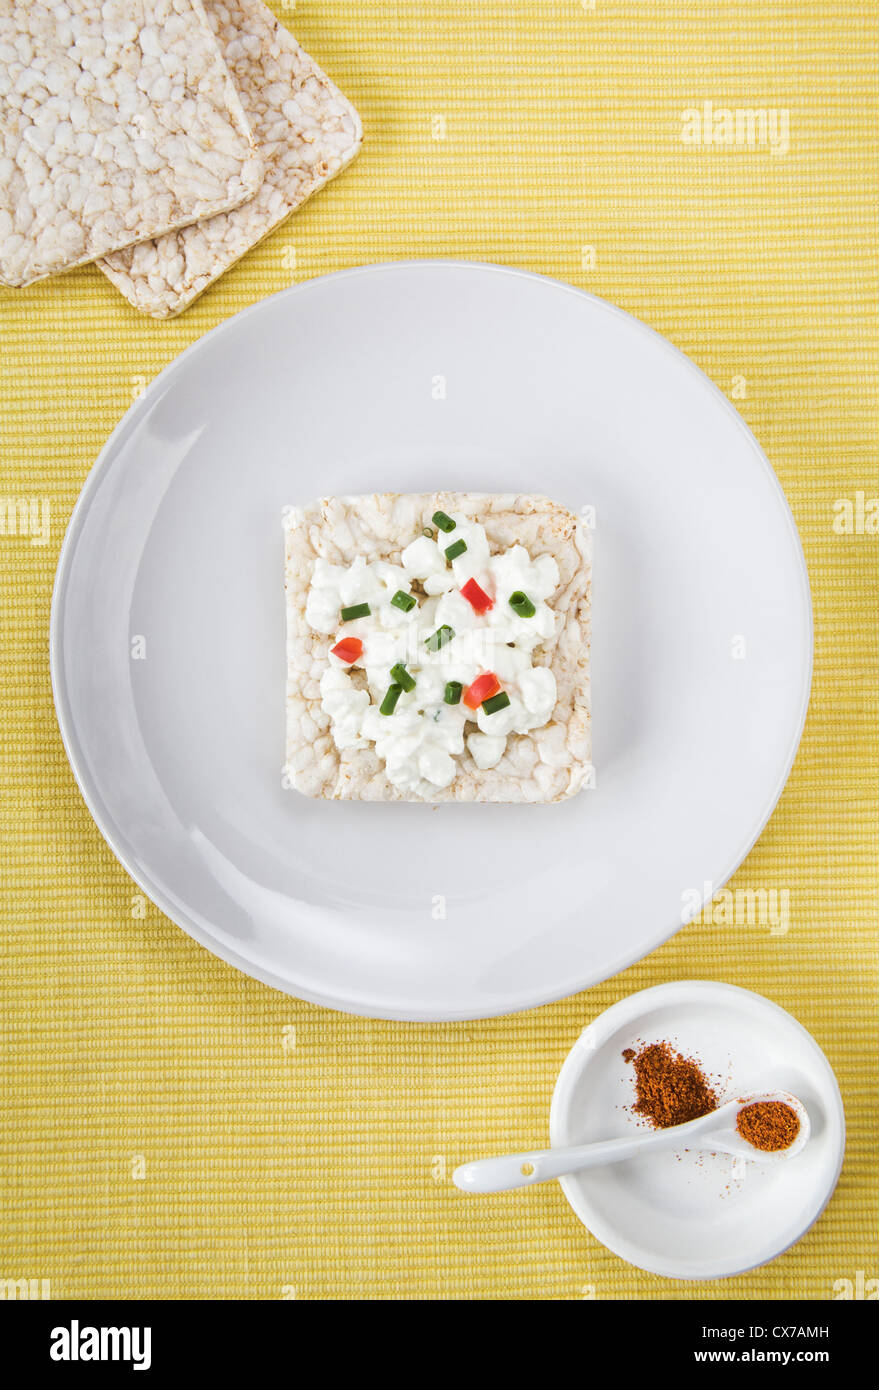 Rice Cake topped with Cottage Cheese Stock Photo